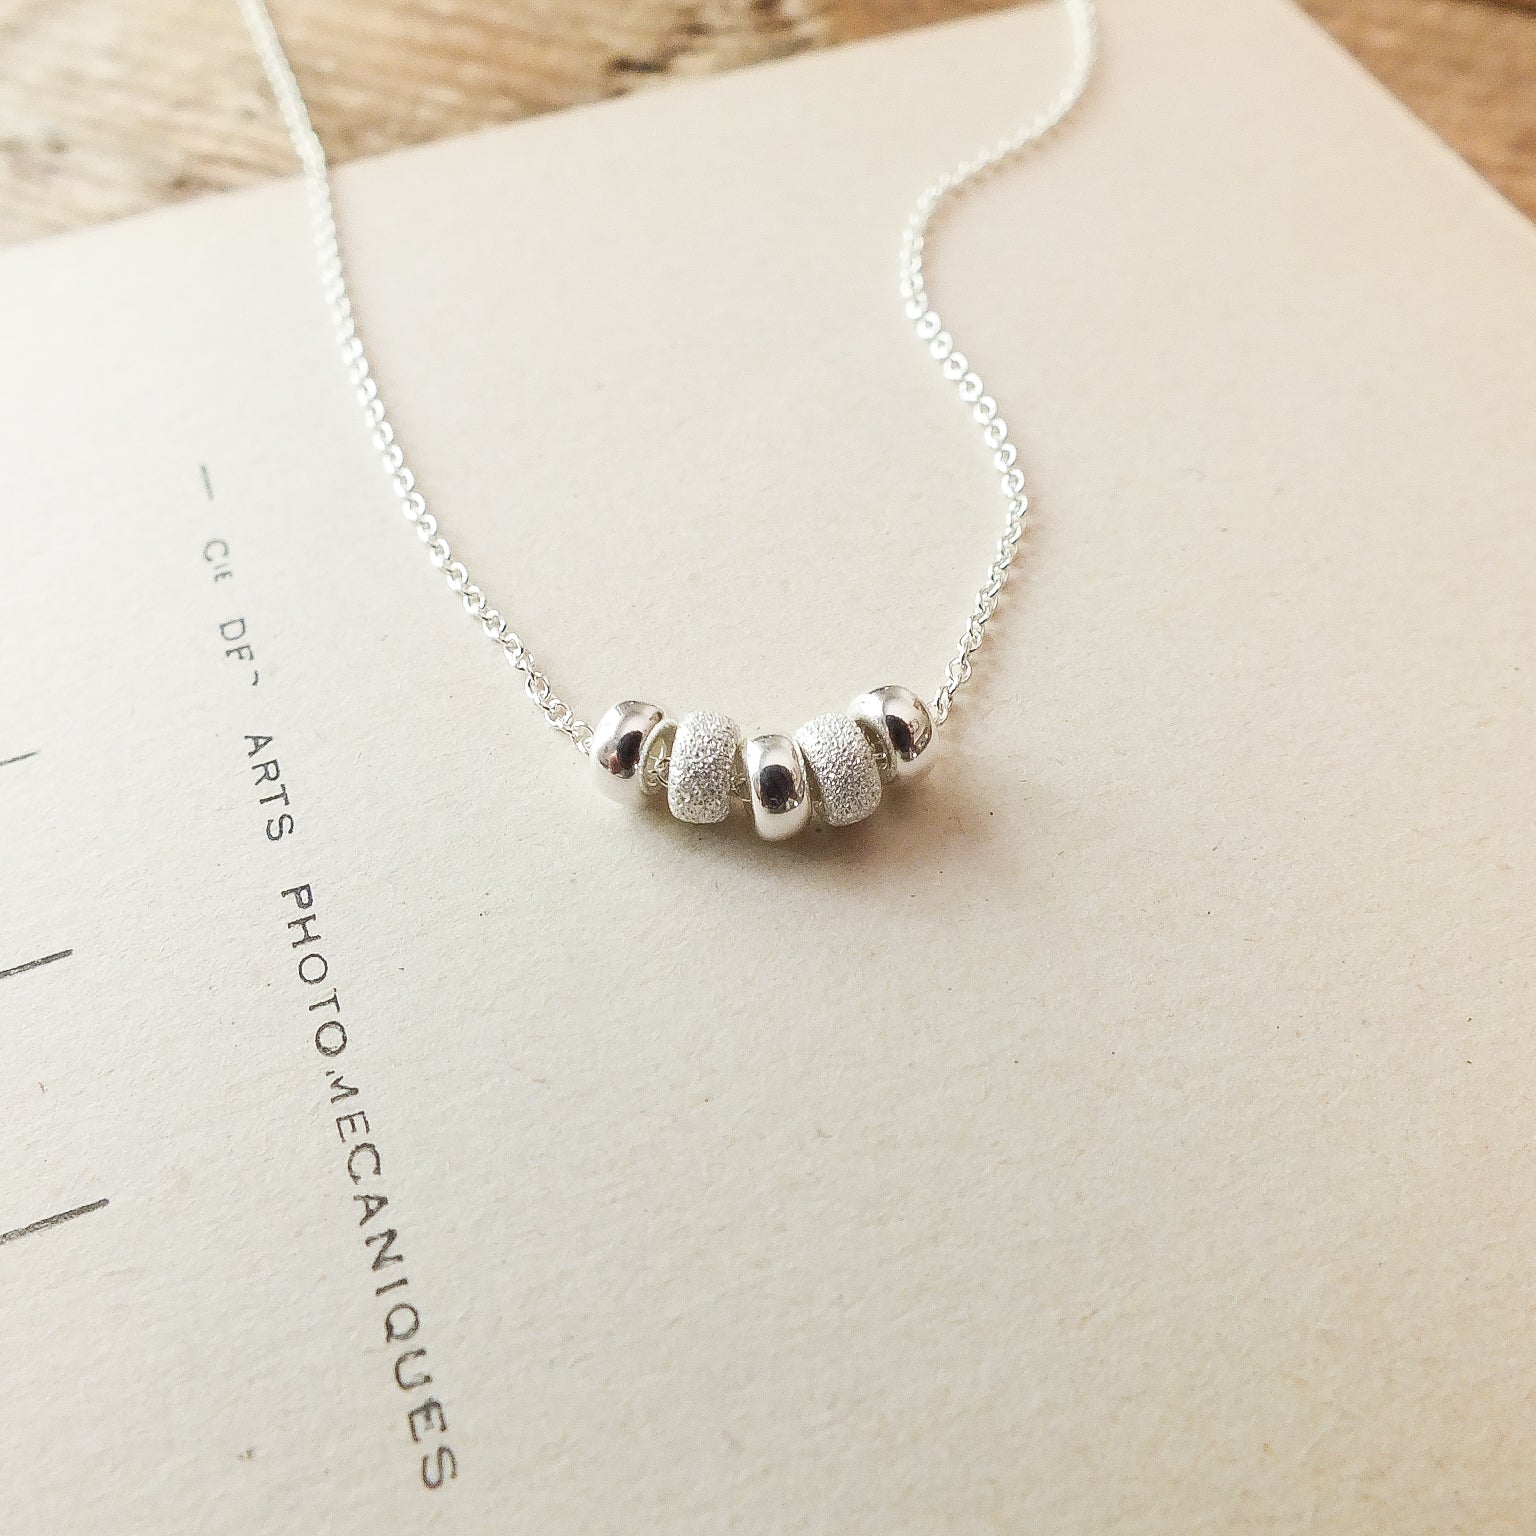 Becoming Jewelry&#39;s My Wish For You Necklace, a sterling silver comfort charm necklace with three beads, is featured on a wooden surface against a paper background.